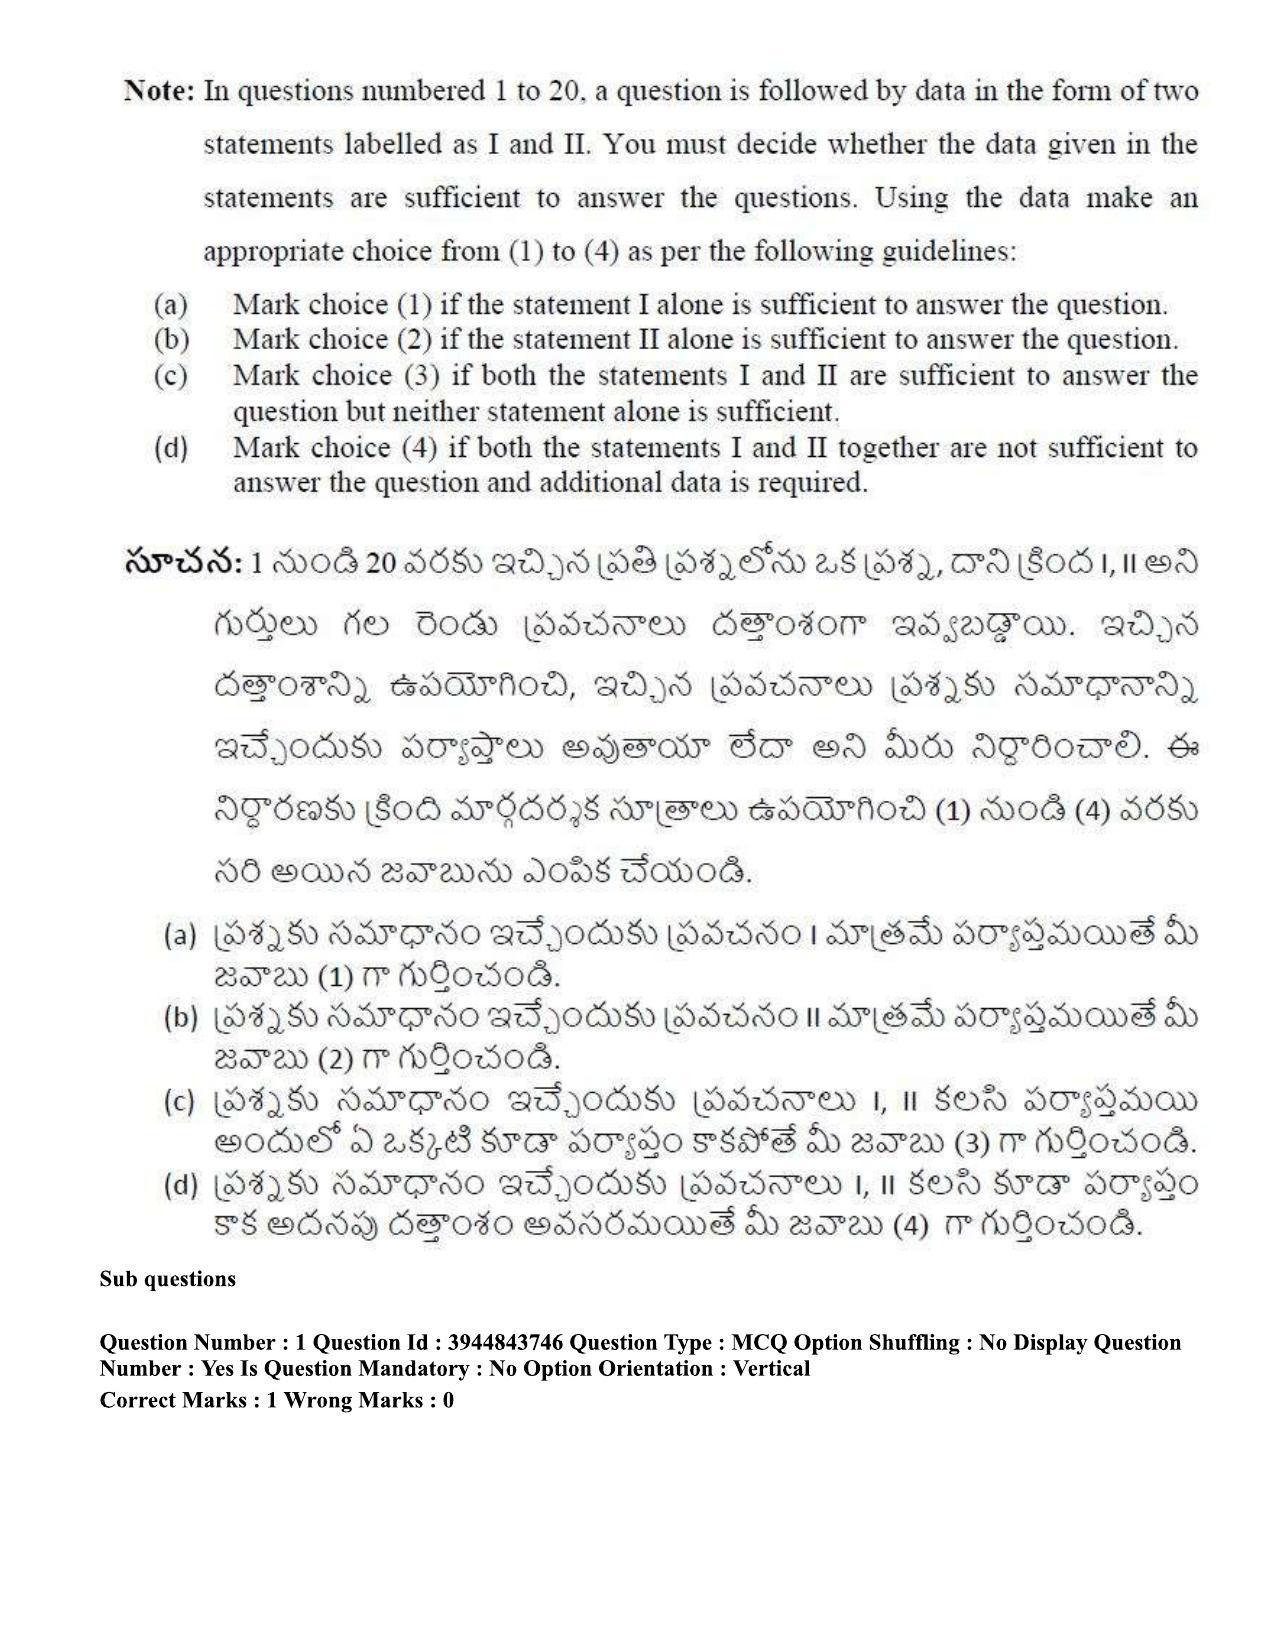 TS ICET 2020 Question Paper 1 - Oct 1, 2020	 - Page 3